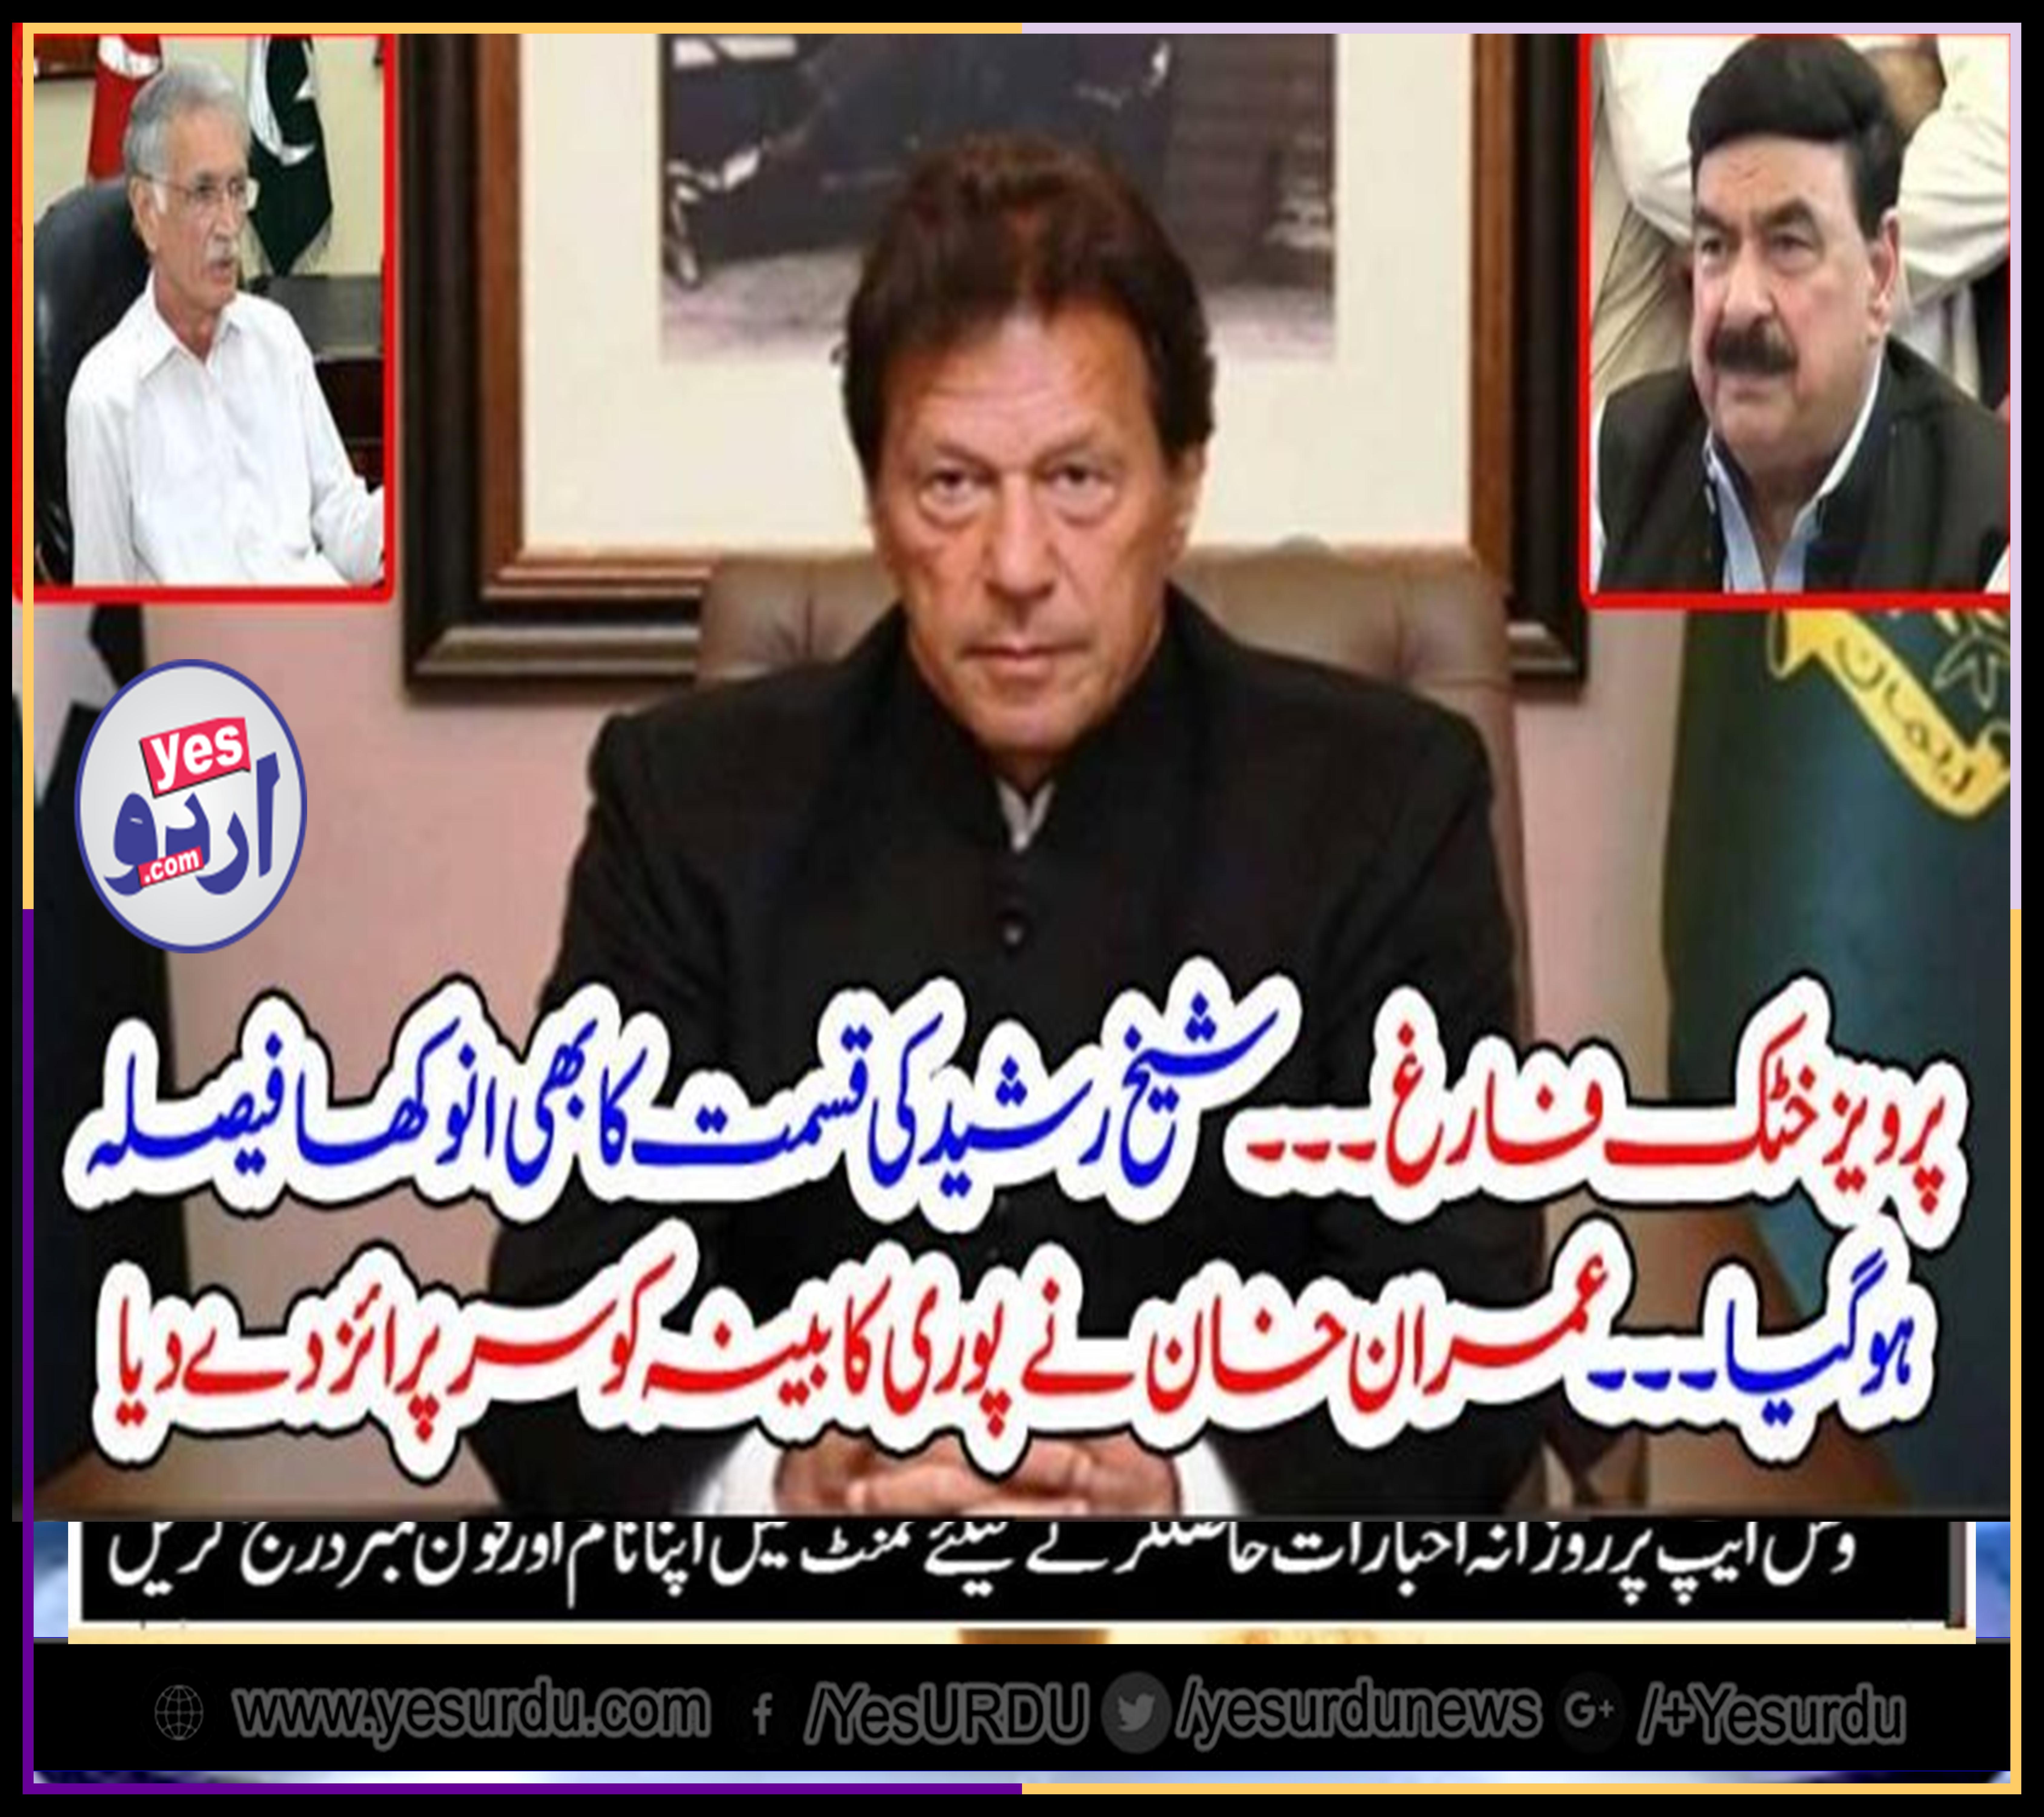 PERVEZ KHATTAK, THROWN, OUT, FROM, CABINET, SHEIKH RASHEED, GIVEN, NEW, PLACE, IN, CABINET